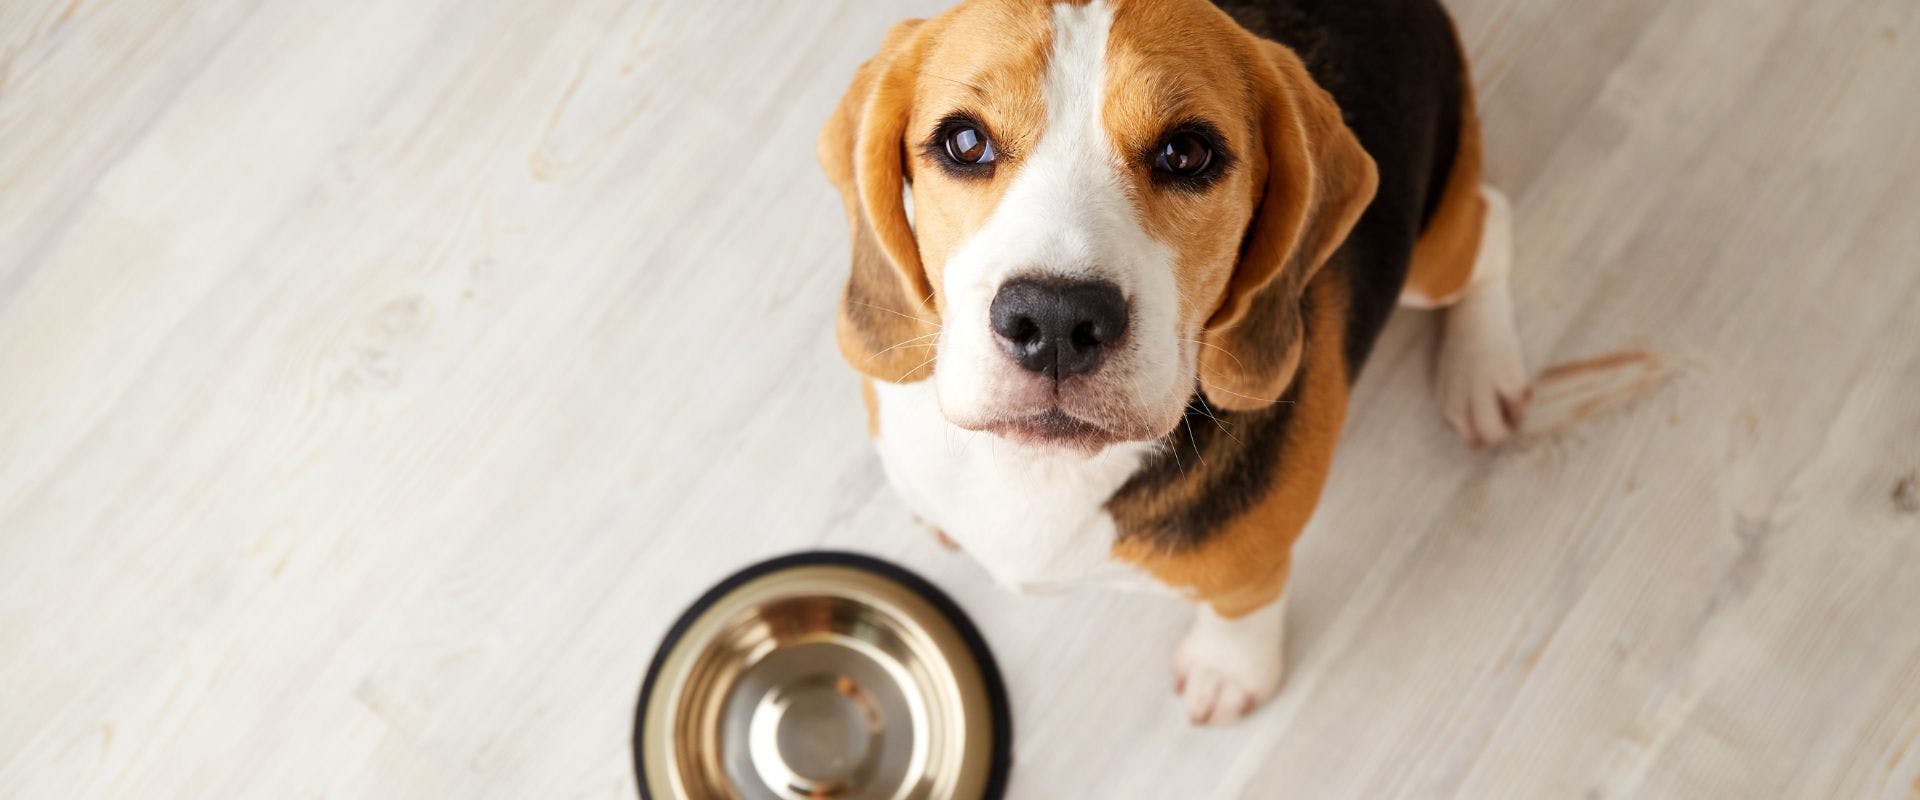 Beagle waiting to be fed from a metal bowl